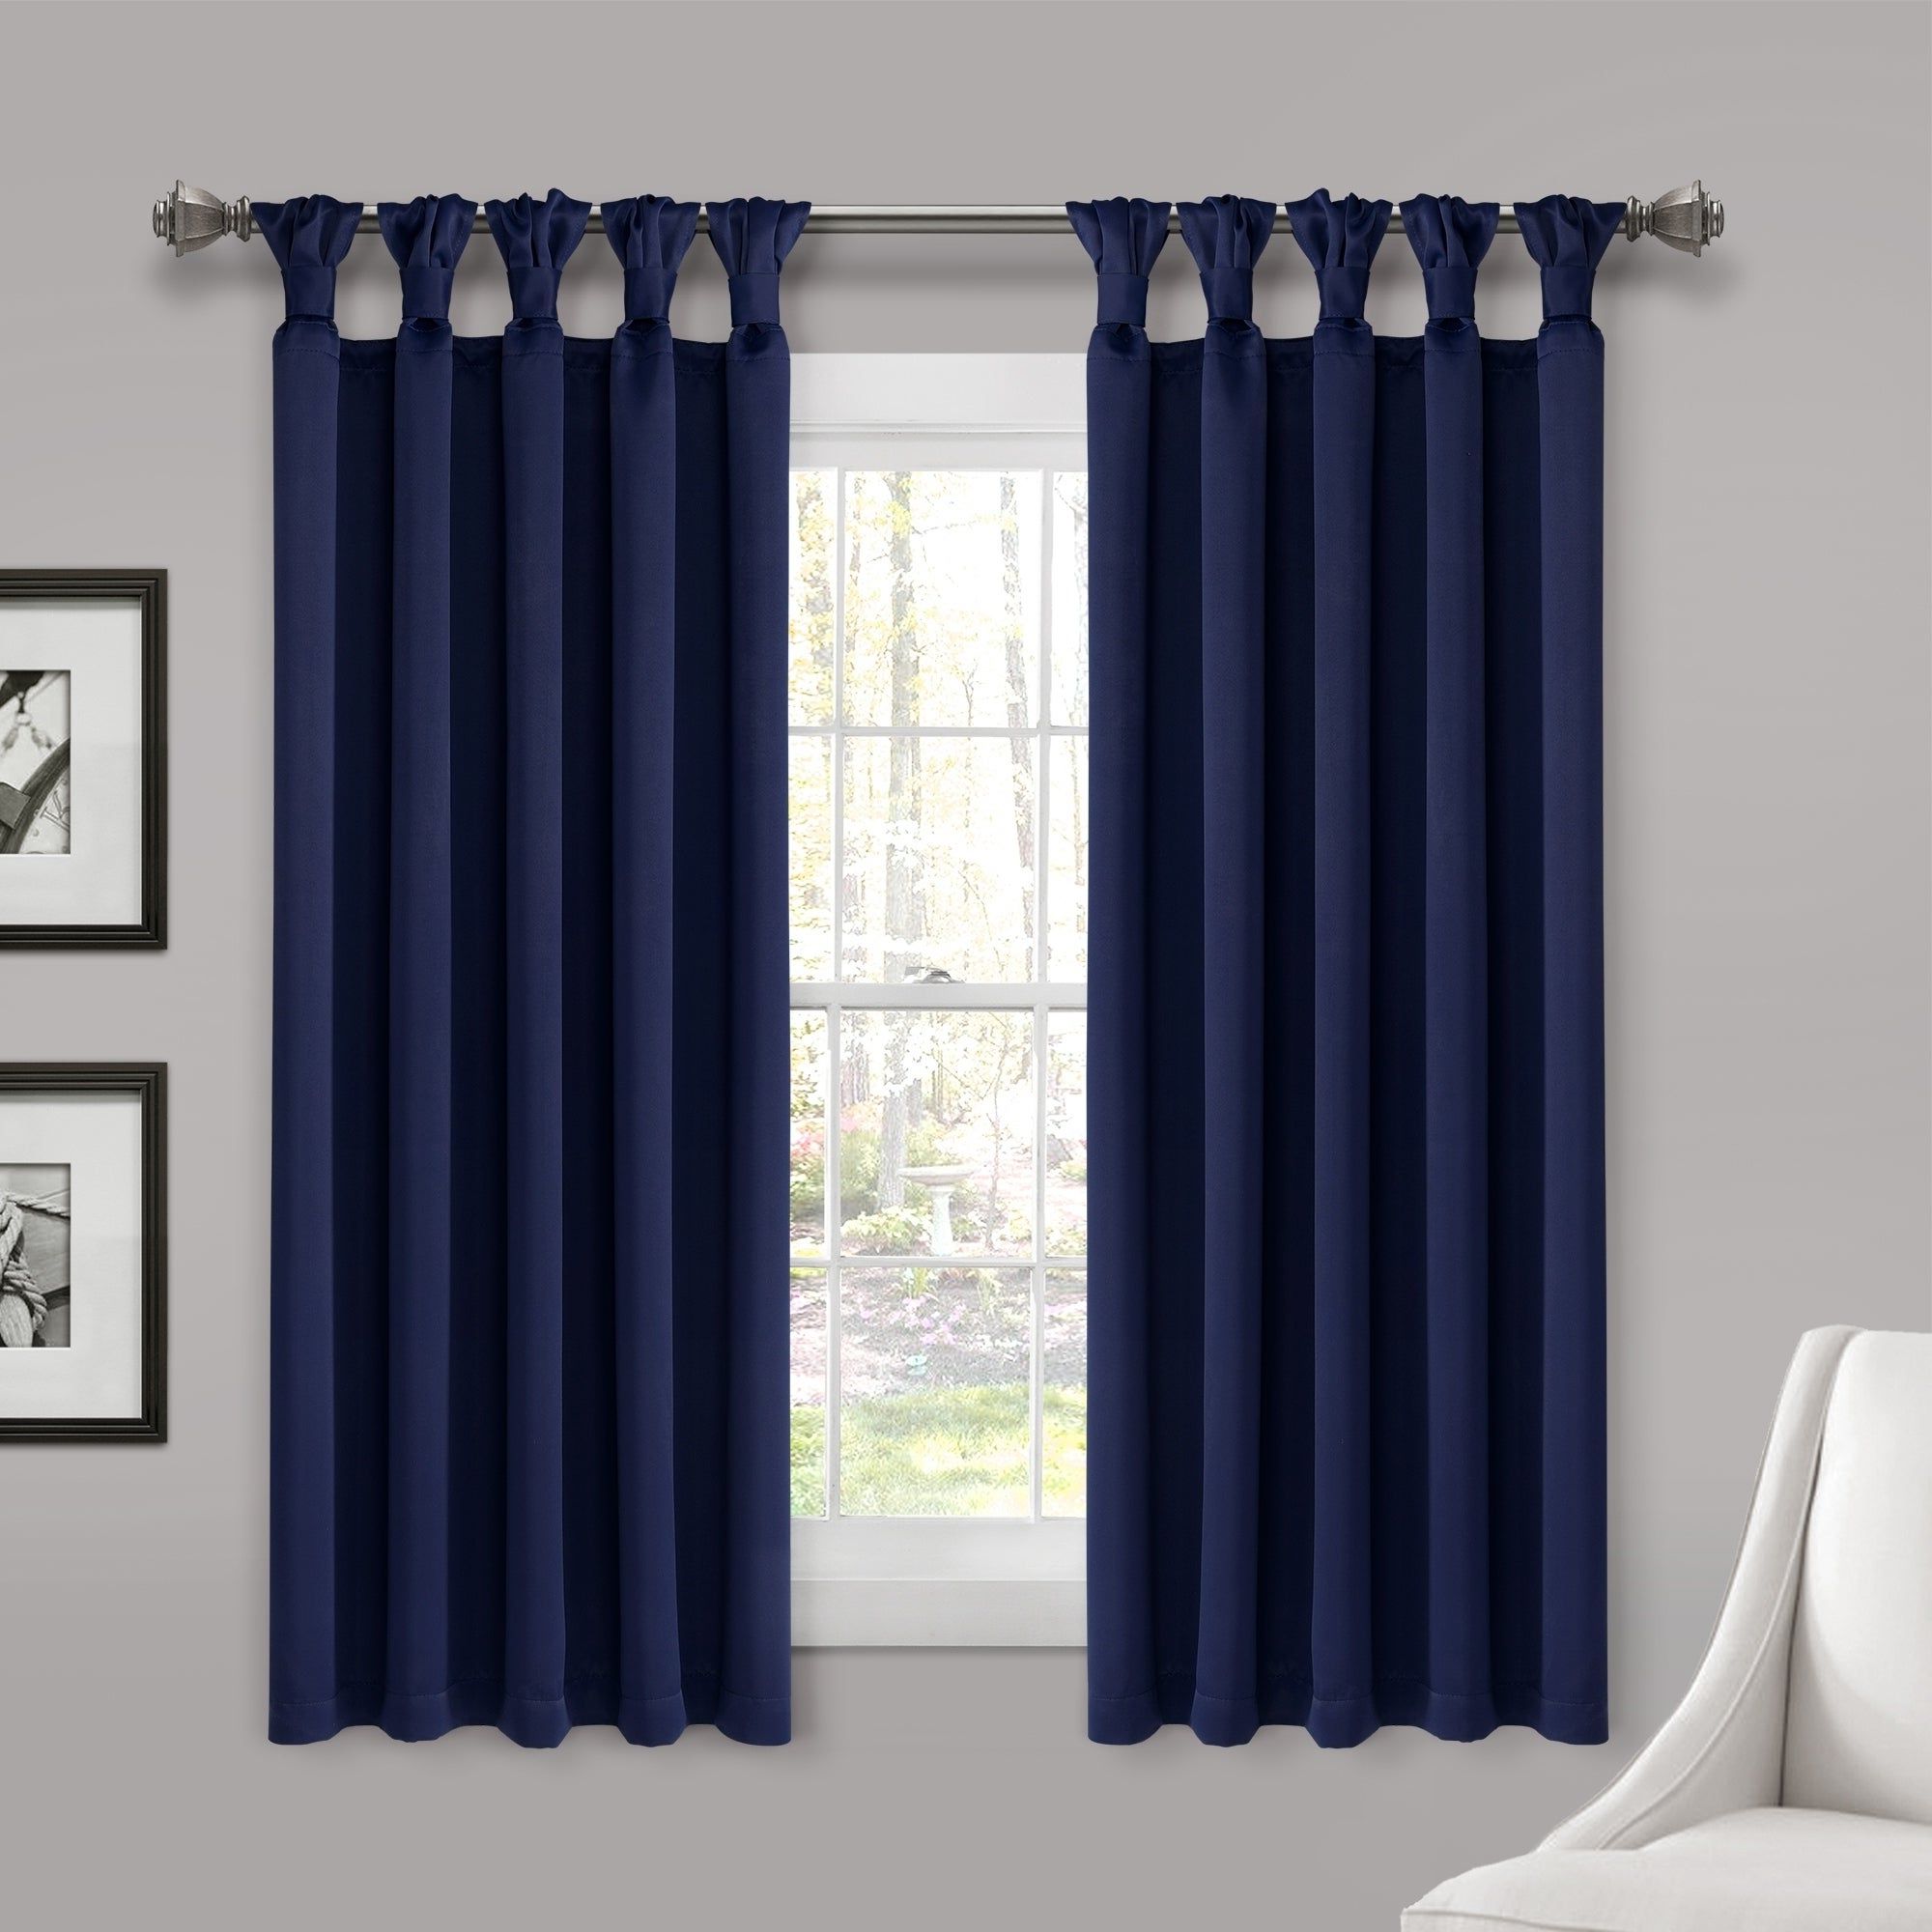 Best And Newest Lush Decor Insulated Knotted Tab Top Blackout Window Curtain Panel Pair Within Knotted Tab Top Window Curtain Panel Pairs (View 6 of 20)